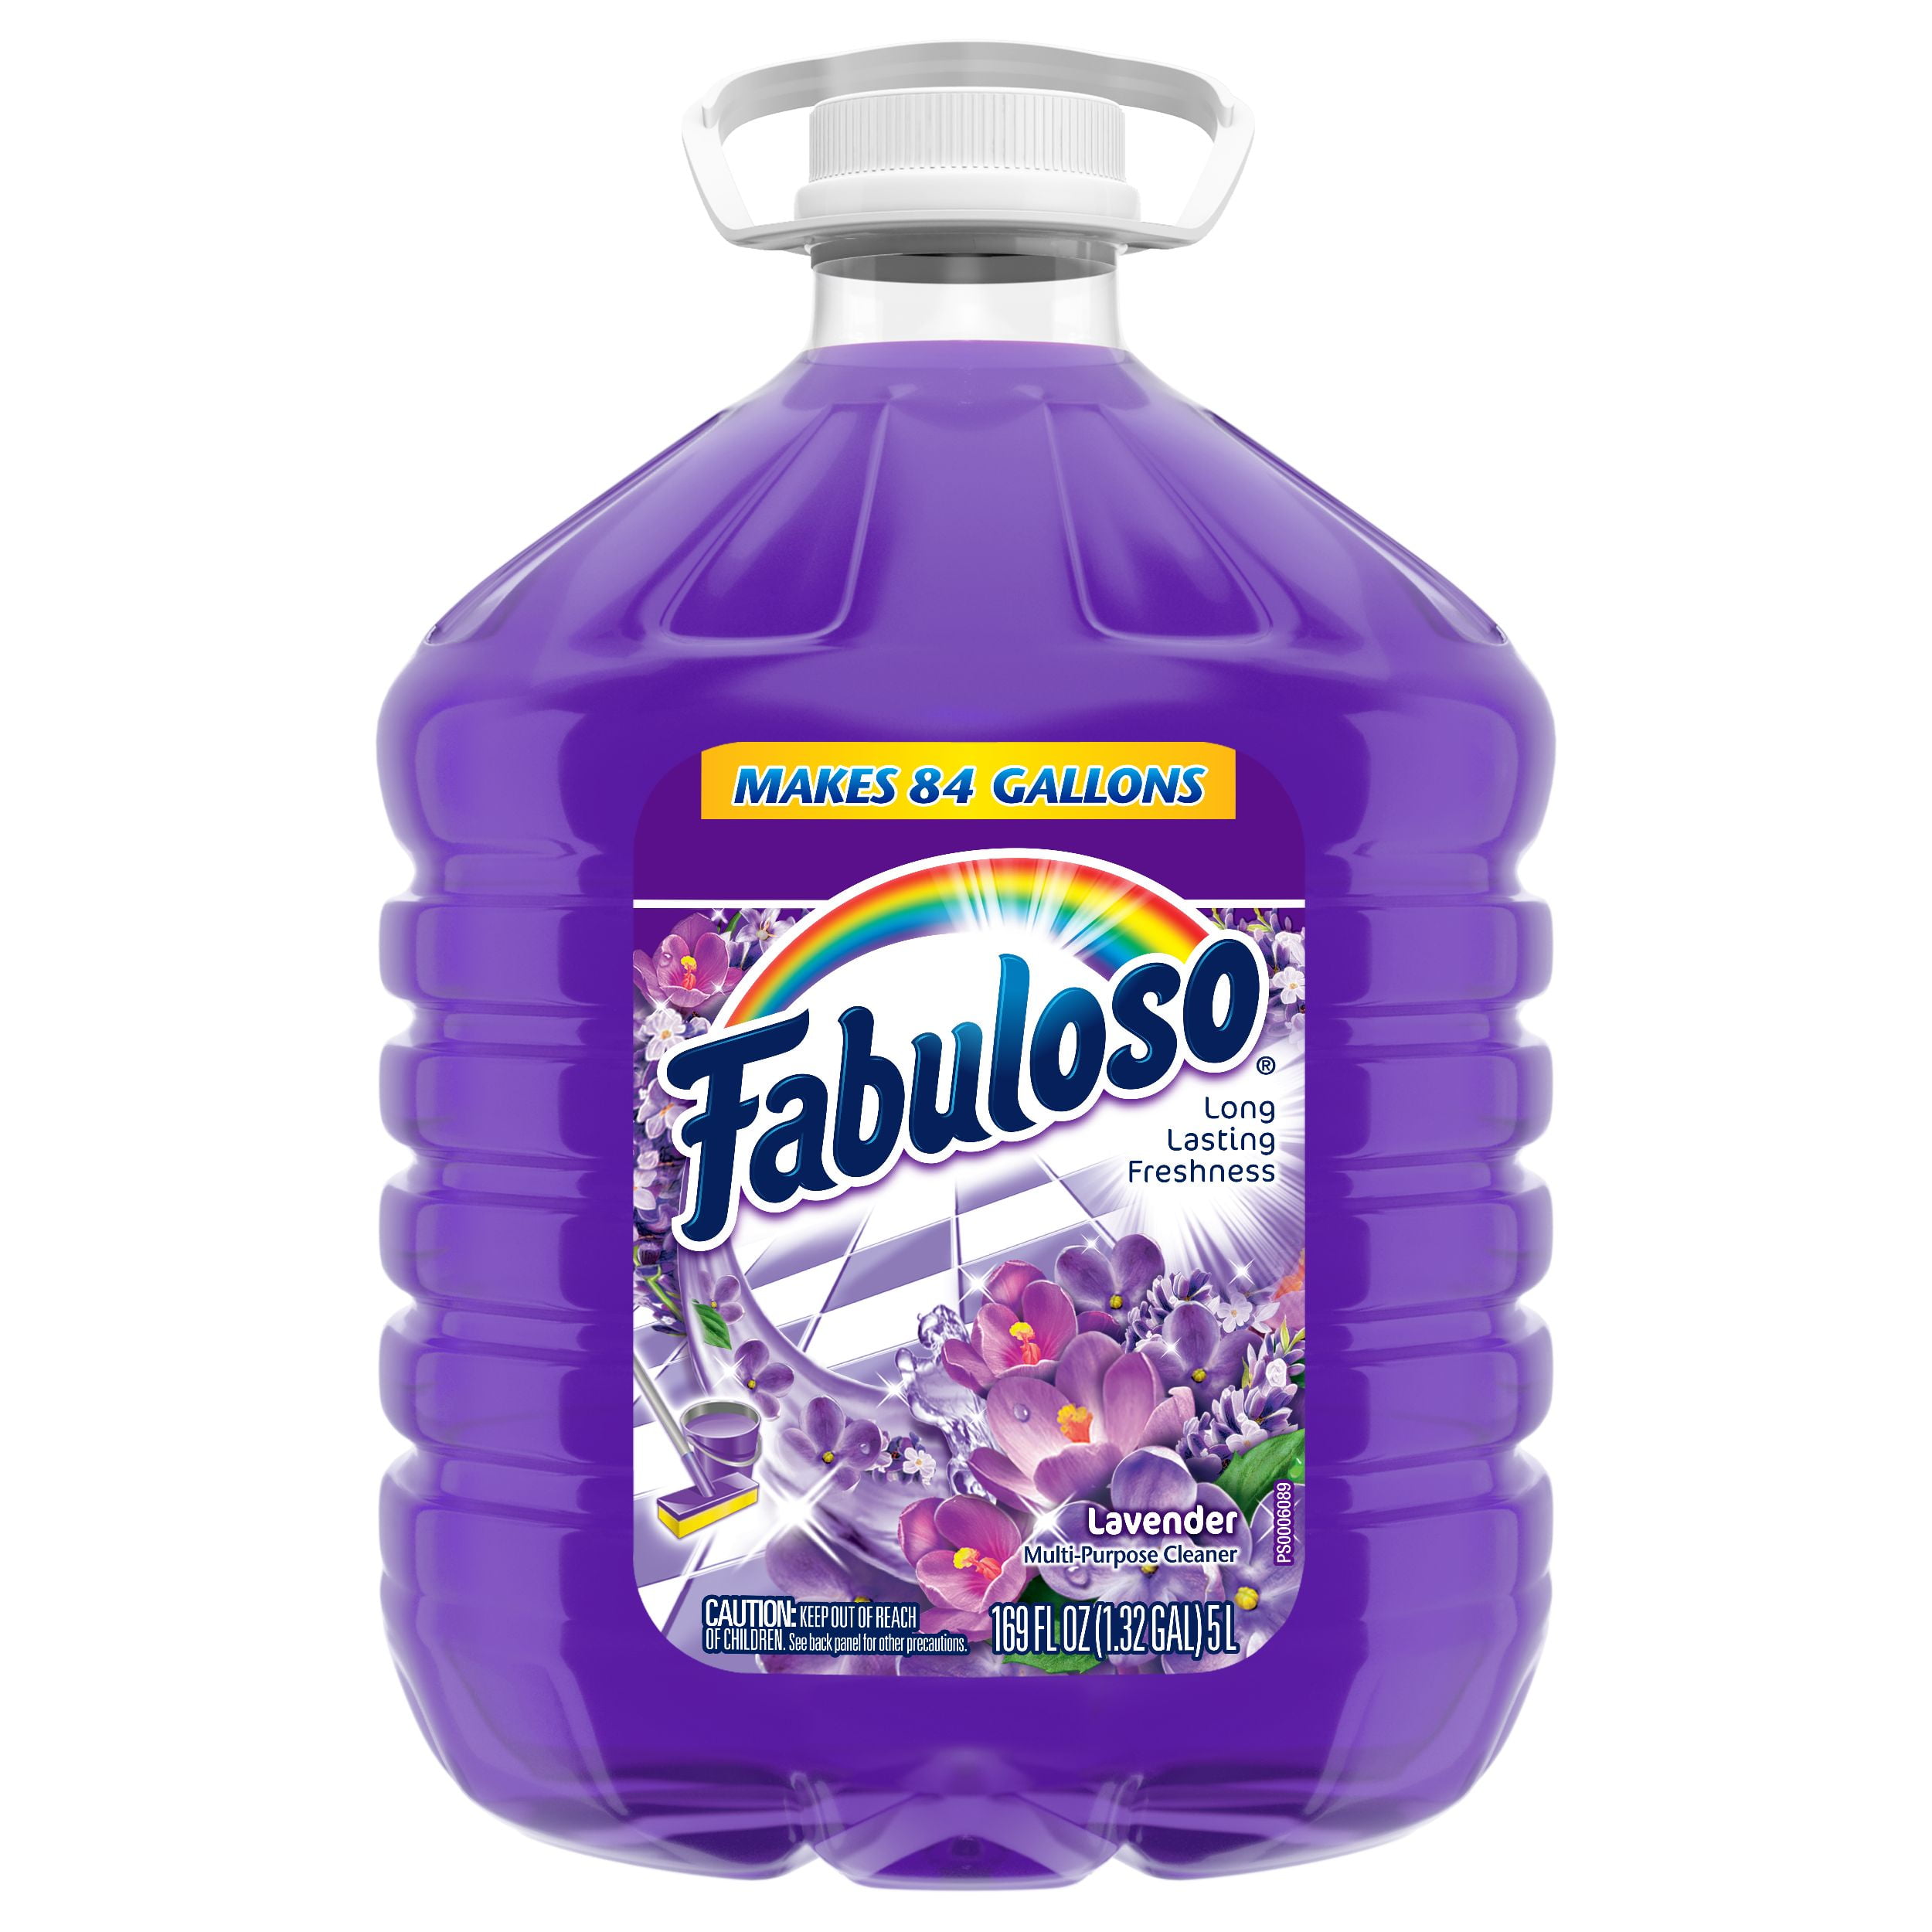 Fabuloso All Purpose Cleaner Lavender, Can You Clean Hardwood Floors With Fabuloso